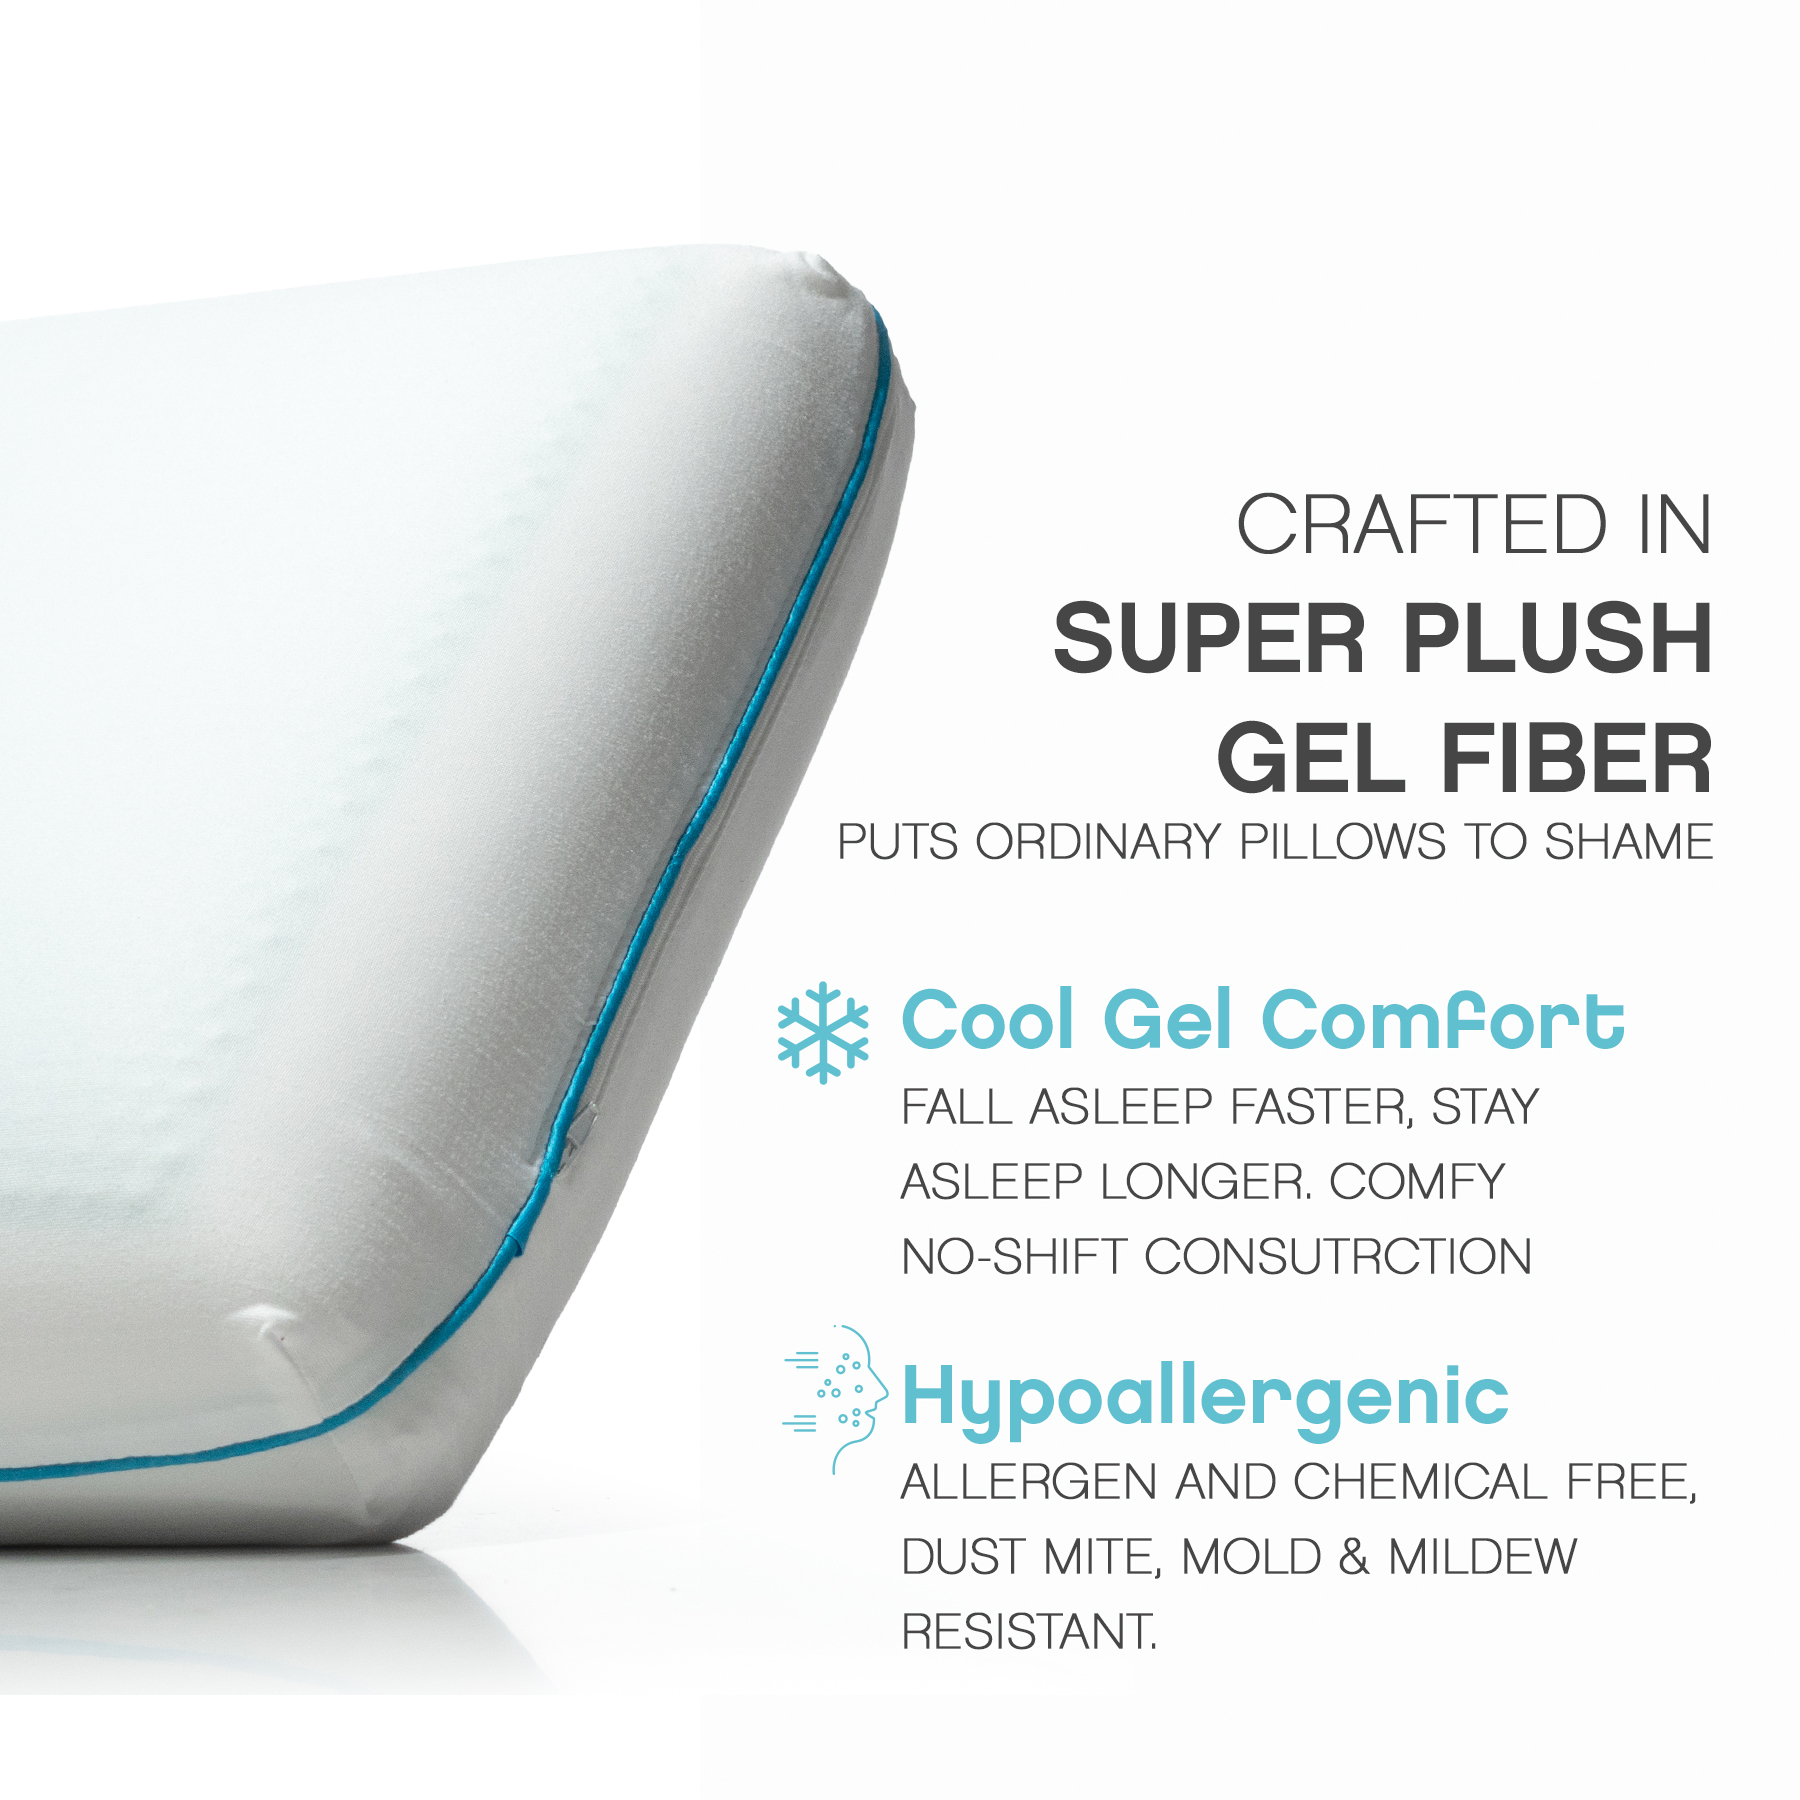 Pur Cool Gel Deep Sleep Comfort Pillow Extra Large Diamond Line Gel Cooling Pillow by Pur-Well Living - image 3 of 9